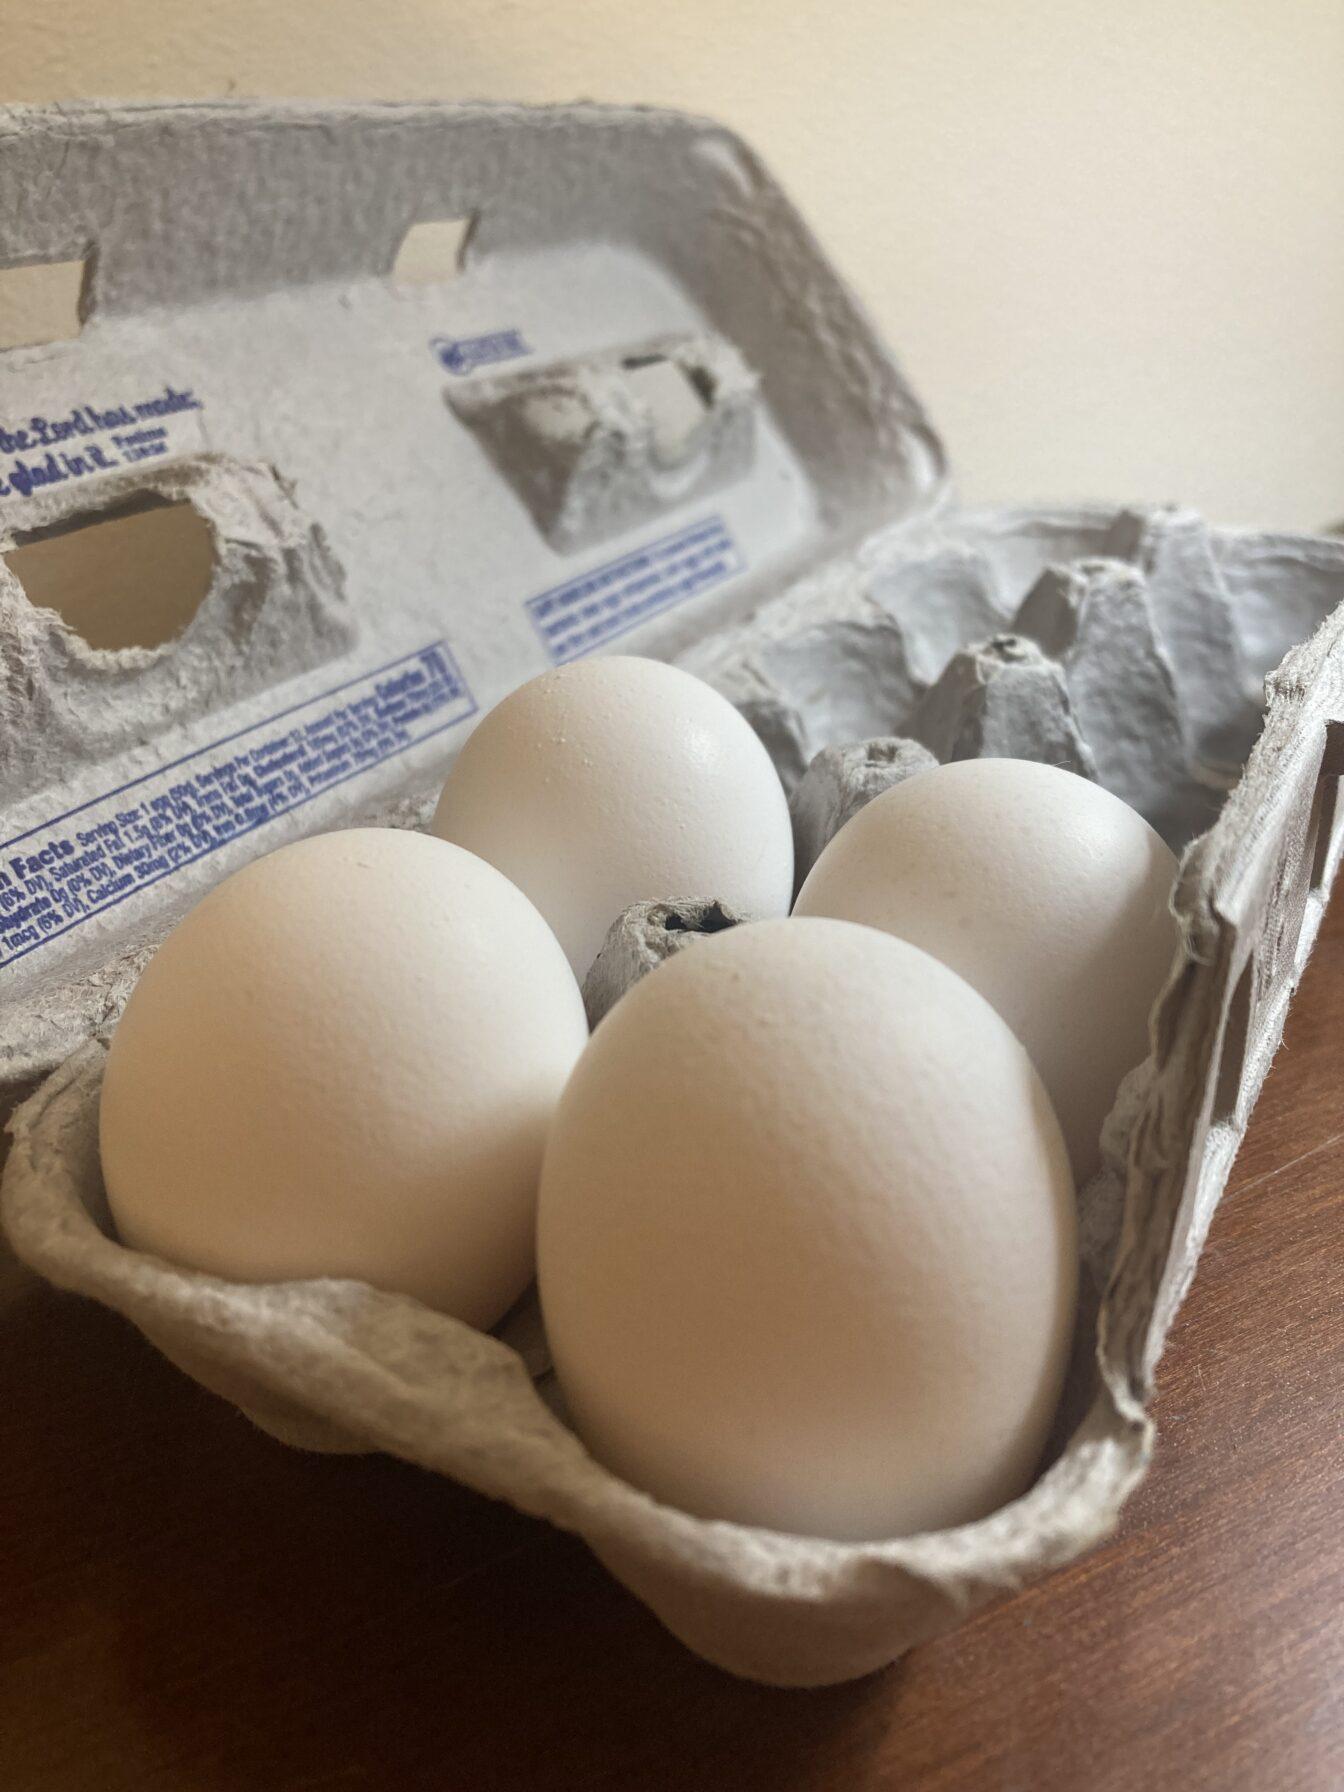 A combination of inflation and avian influenza has driven the cost of eggs up recently